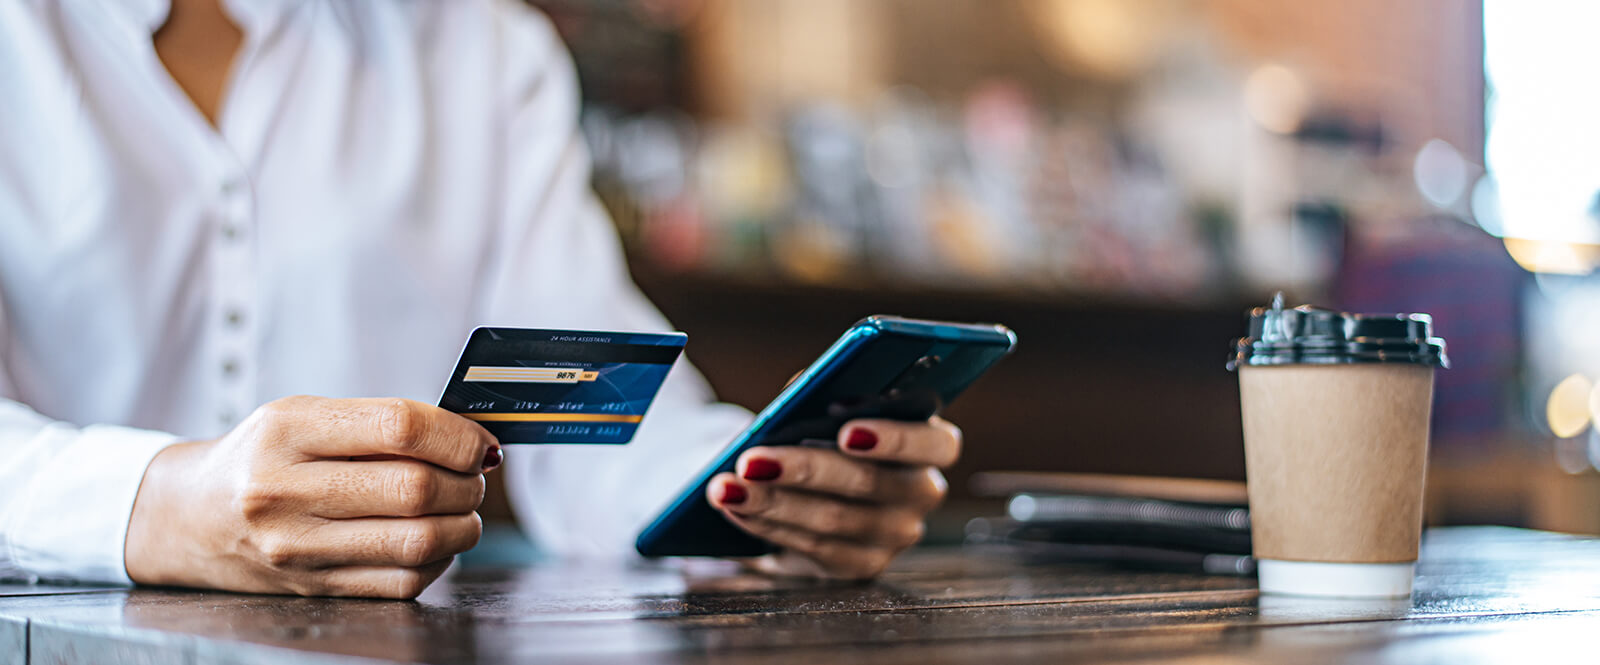 Woman holding a smartphone and a credit card in a cafe